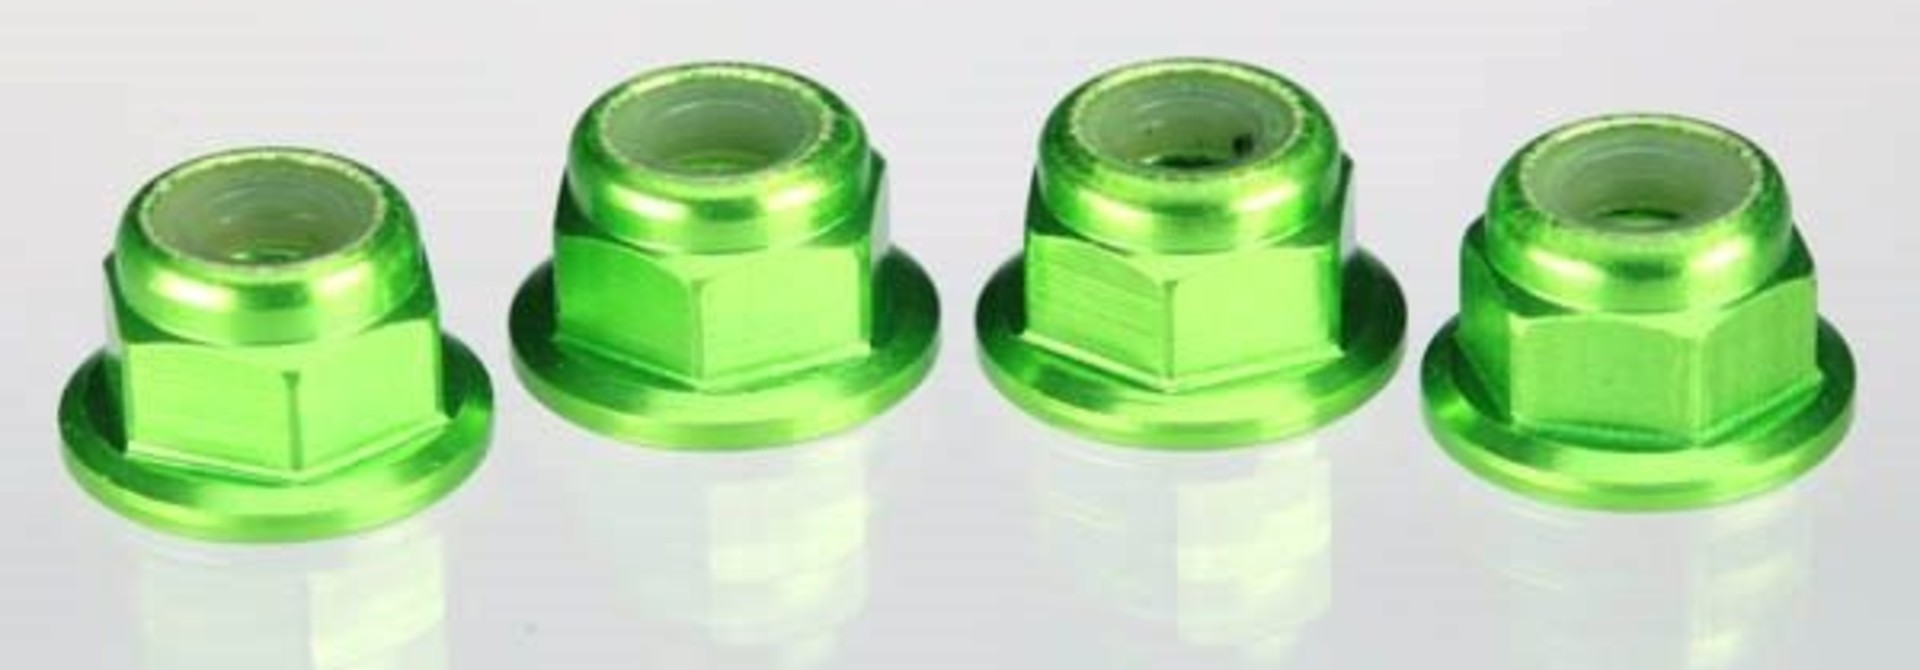 Green anodized axle nuts, TRX1747G